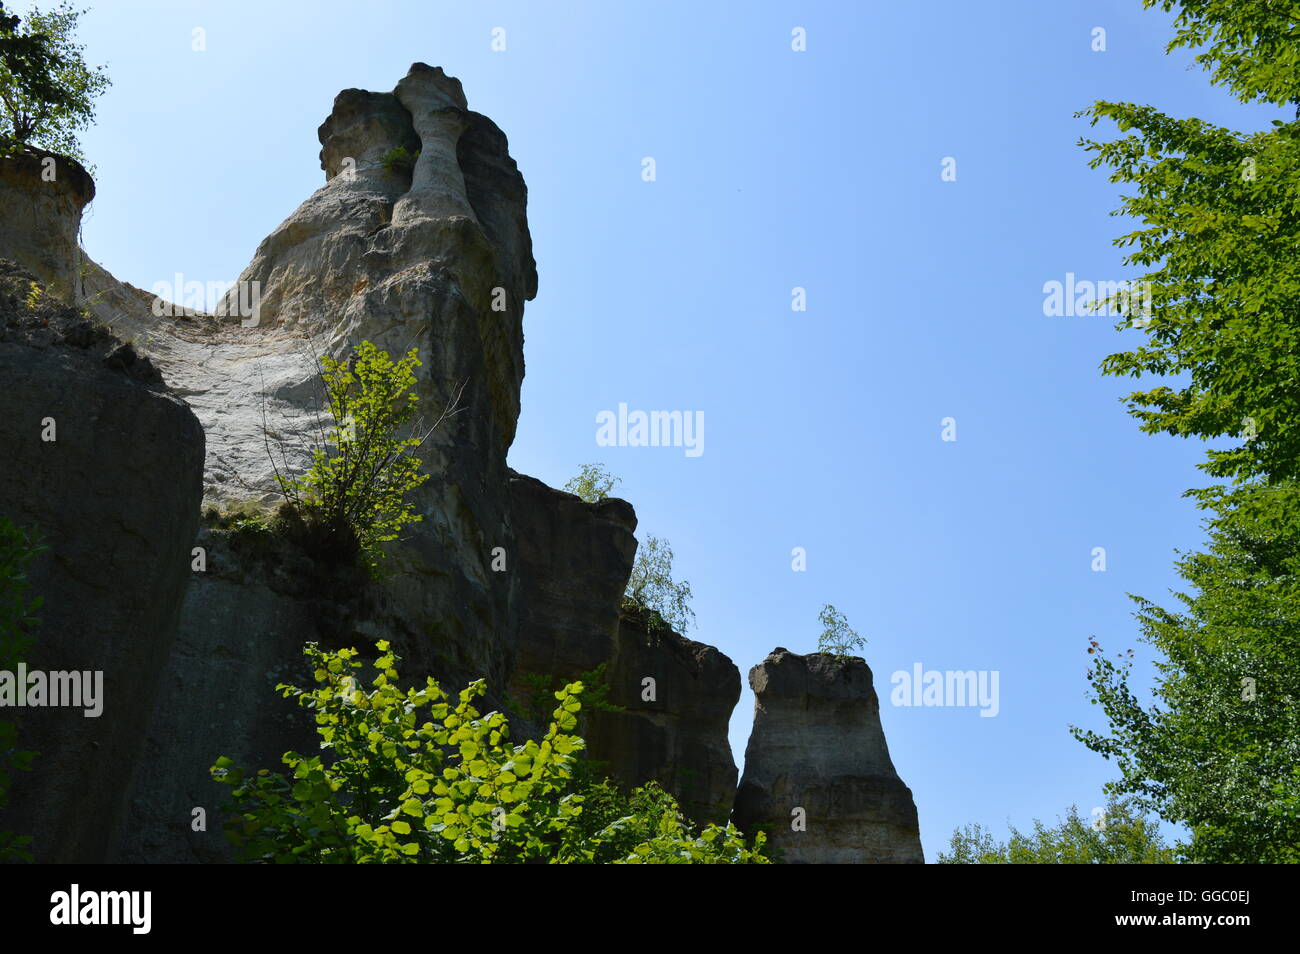 Dragons' garden, geological reservation in Romania Stock Photo